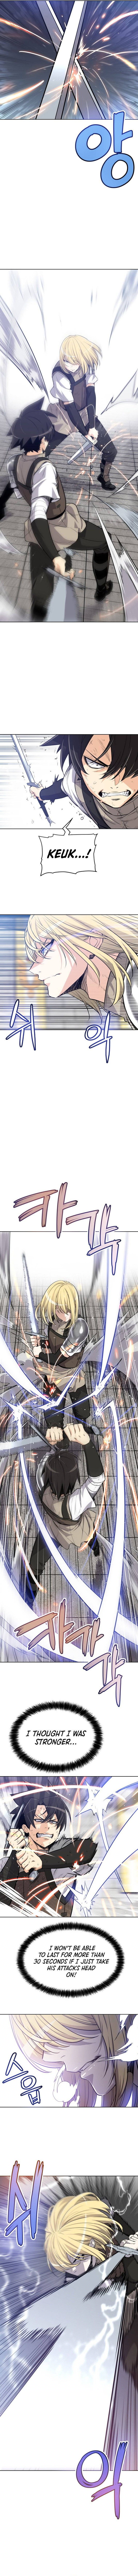 Overpowered Sword chapter 13